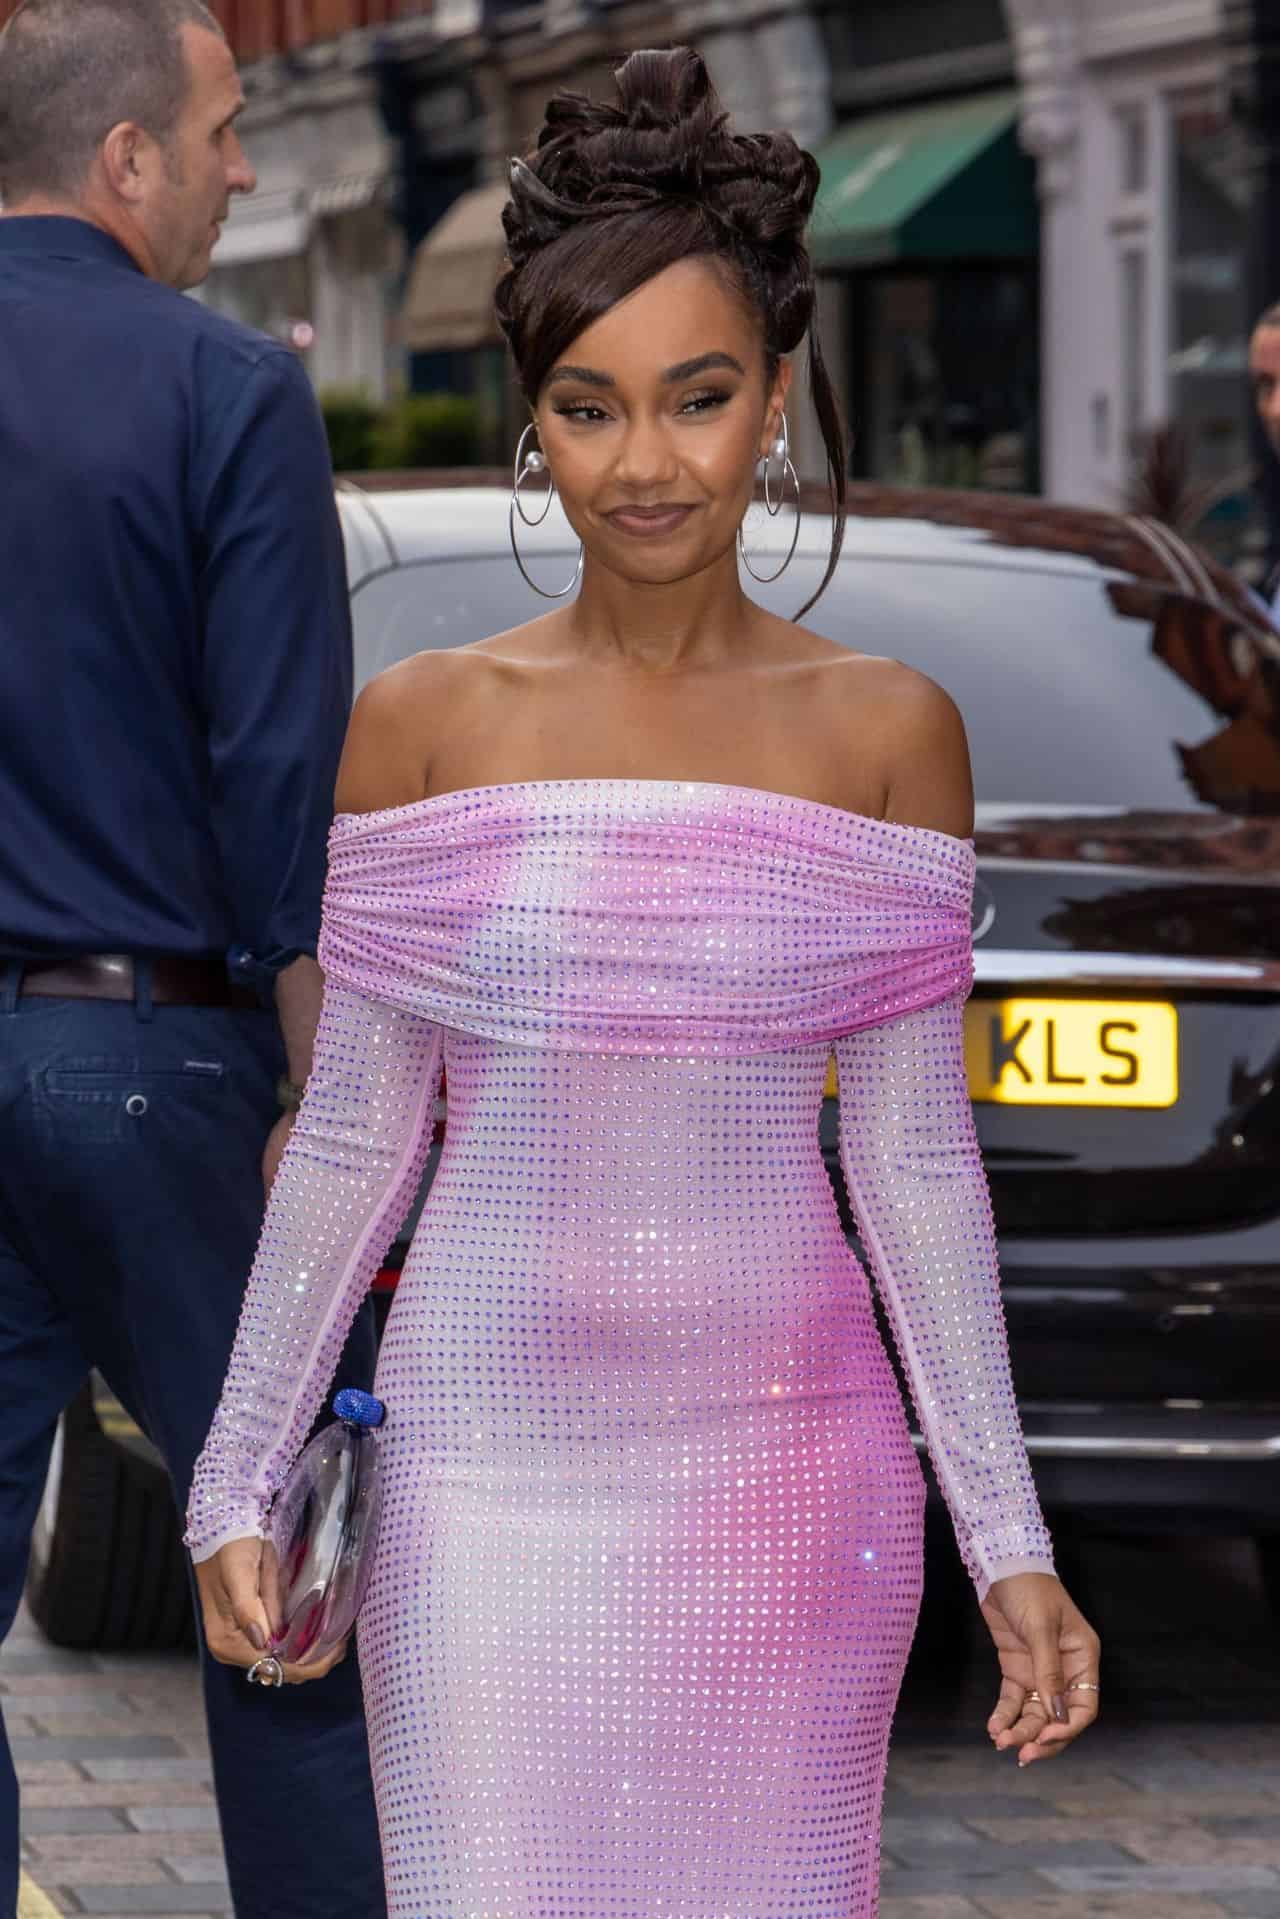 Leigh-Anne Pinnock is an Absolute Vision of Beauty at British Vogue Party